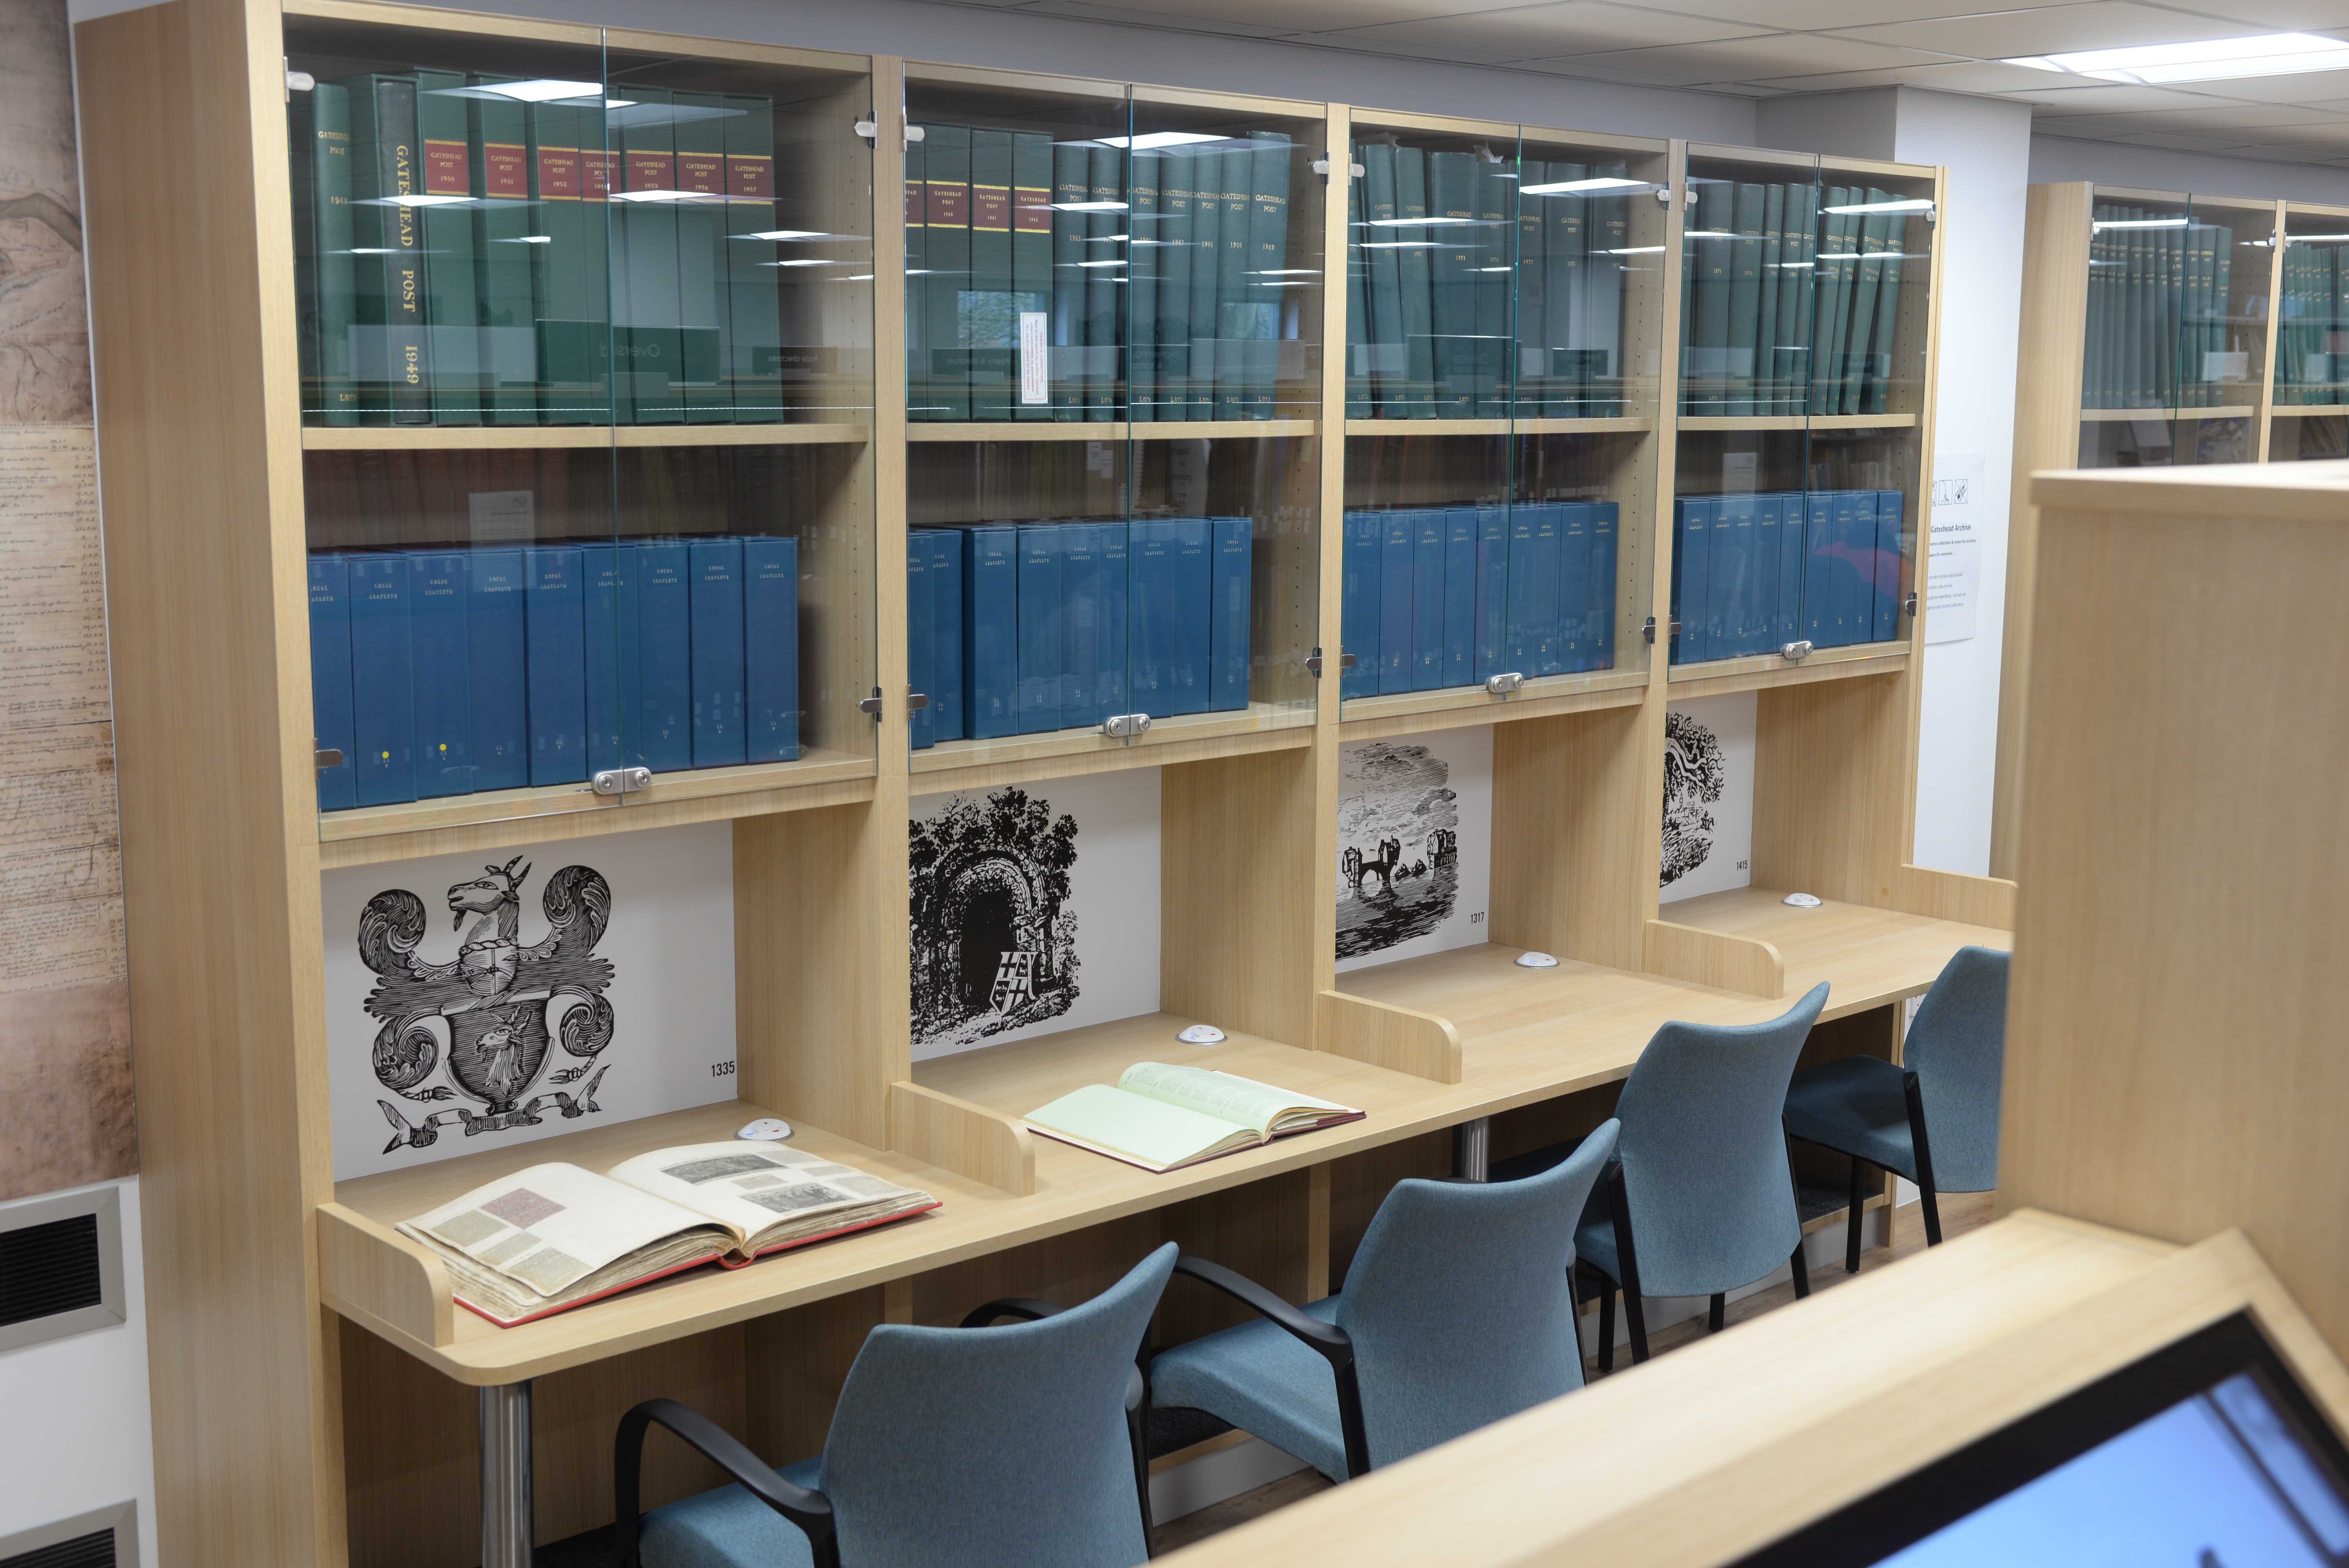 Customised individual study desks with glazed cabinets above for the runs of bound volumes